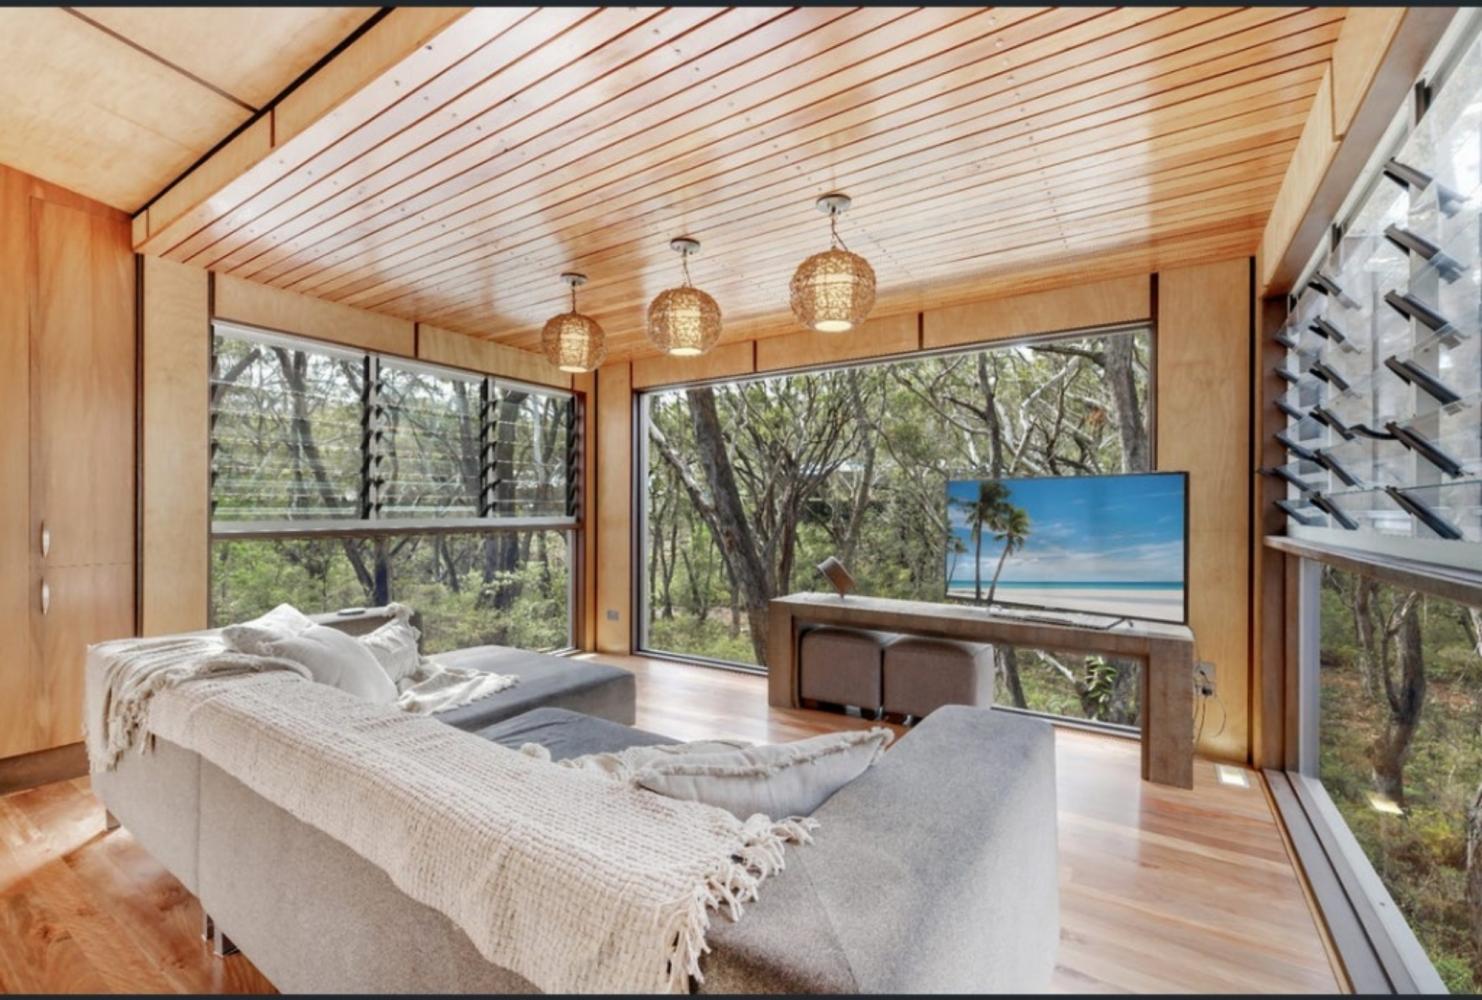 sitting room with smart tv and lounge over looking natural forest